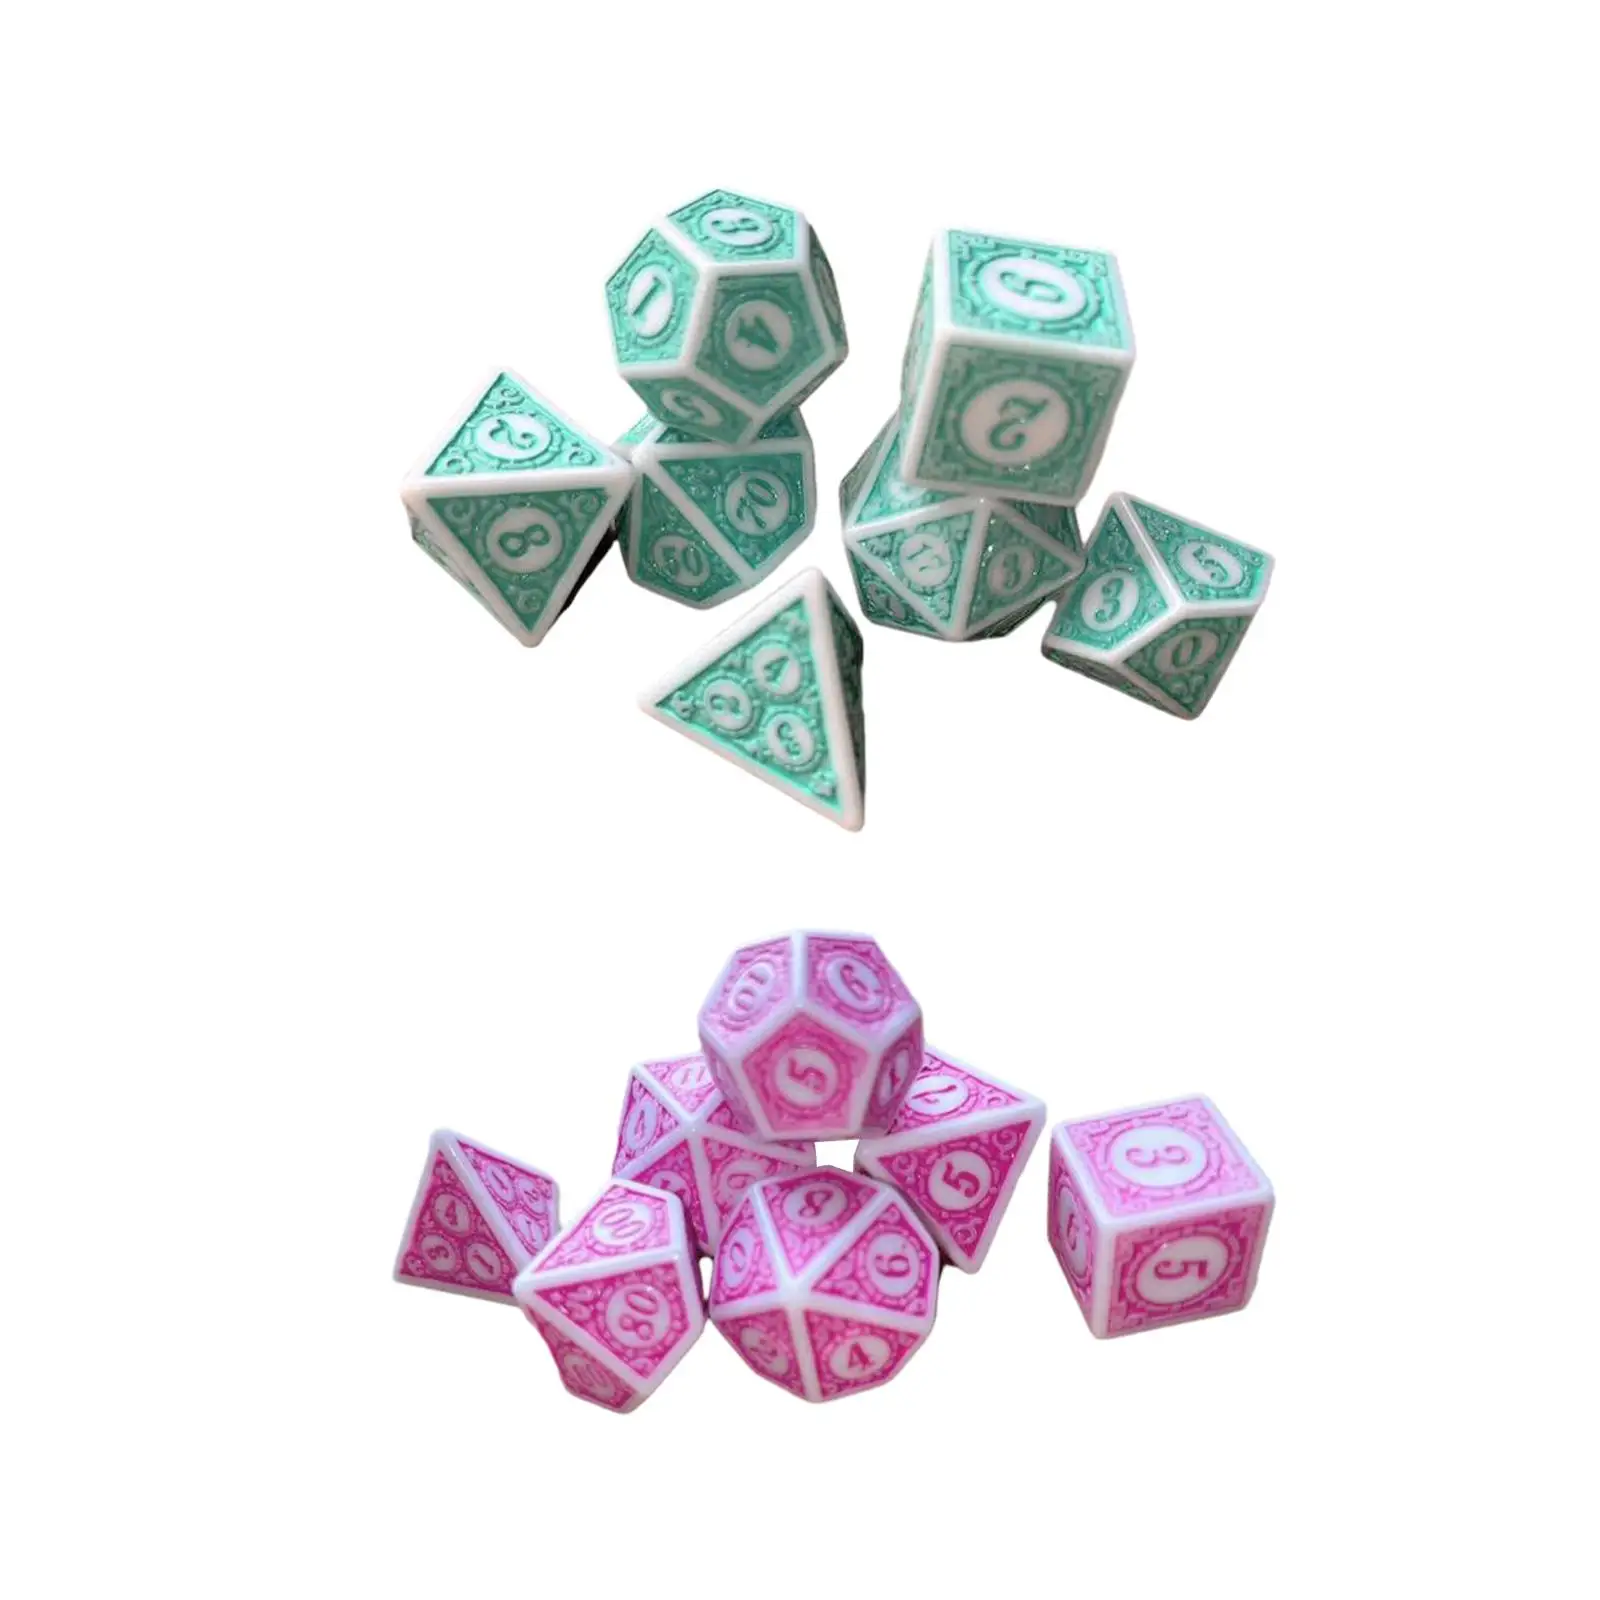 7x Multi Sided Game Dices Acrylic D20 D12 D10 D8 D6 D4 Party Favors Dice Set for Party KTV Card Game Card Games Board Game